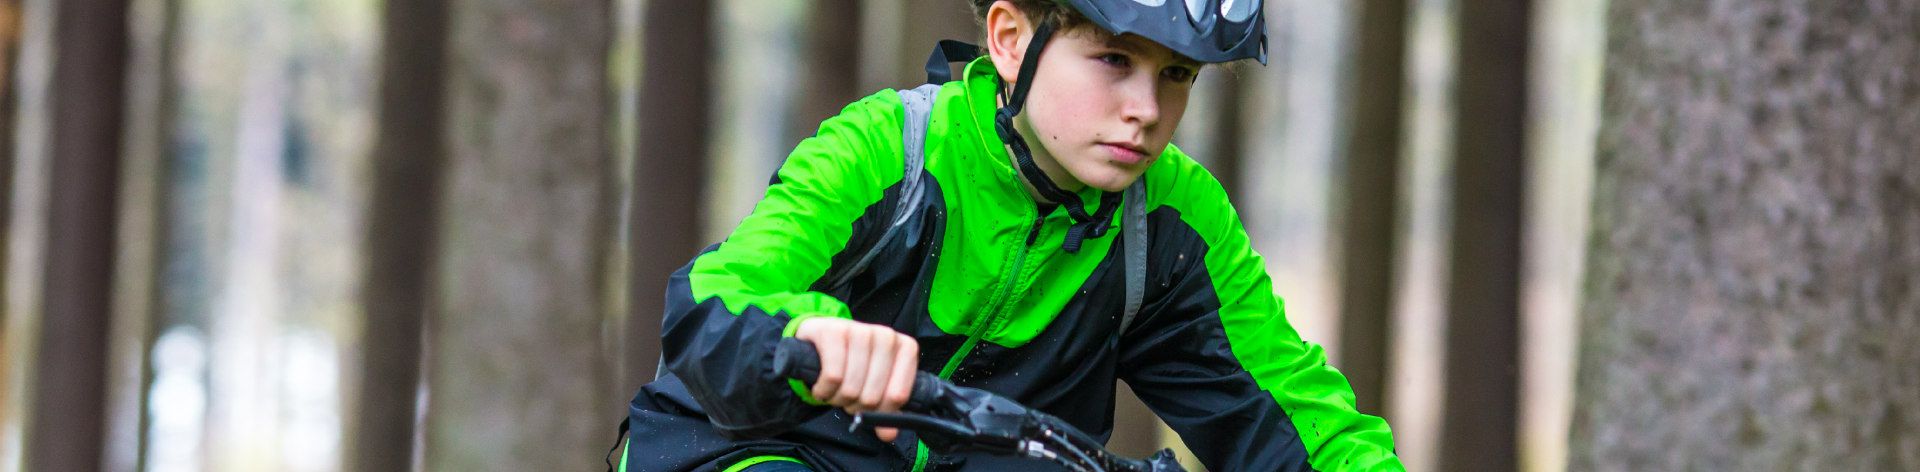 online cycling jackets kids